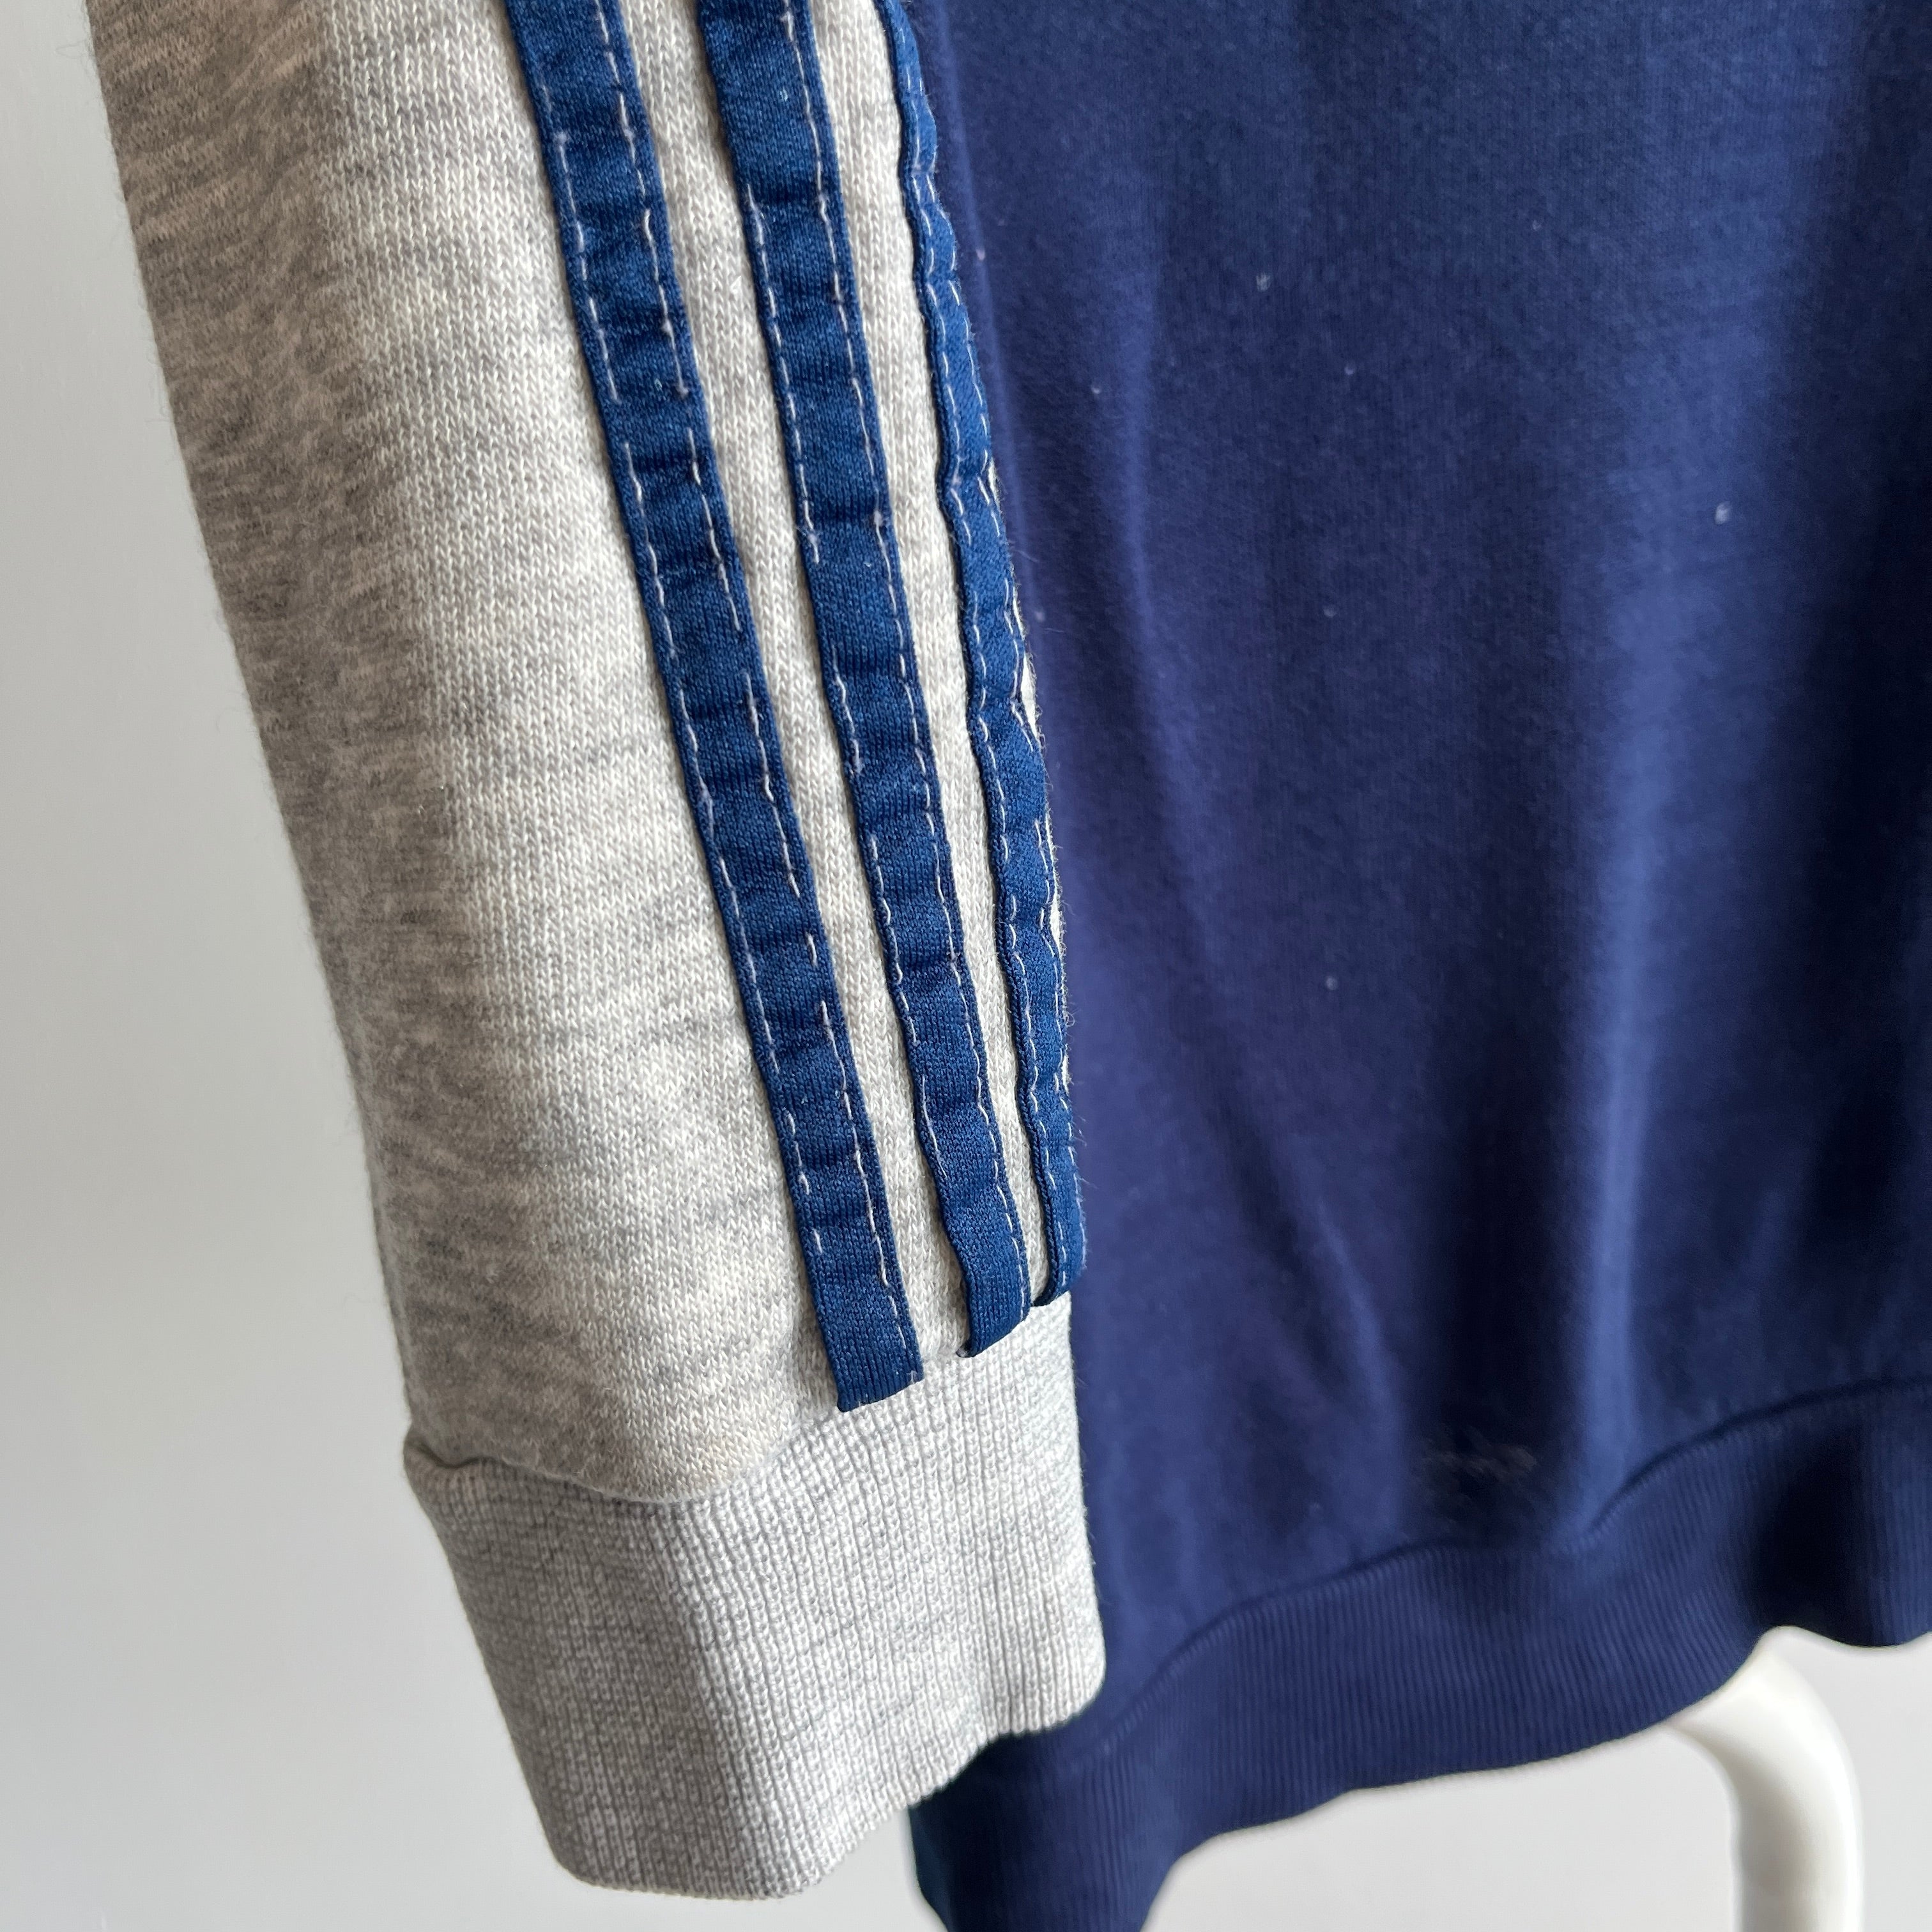 1970s Super Thinned Out and Thrashed Triple Stripe V-Neck Sweatshirt